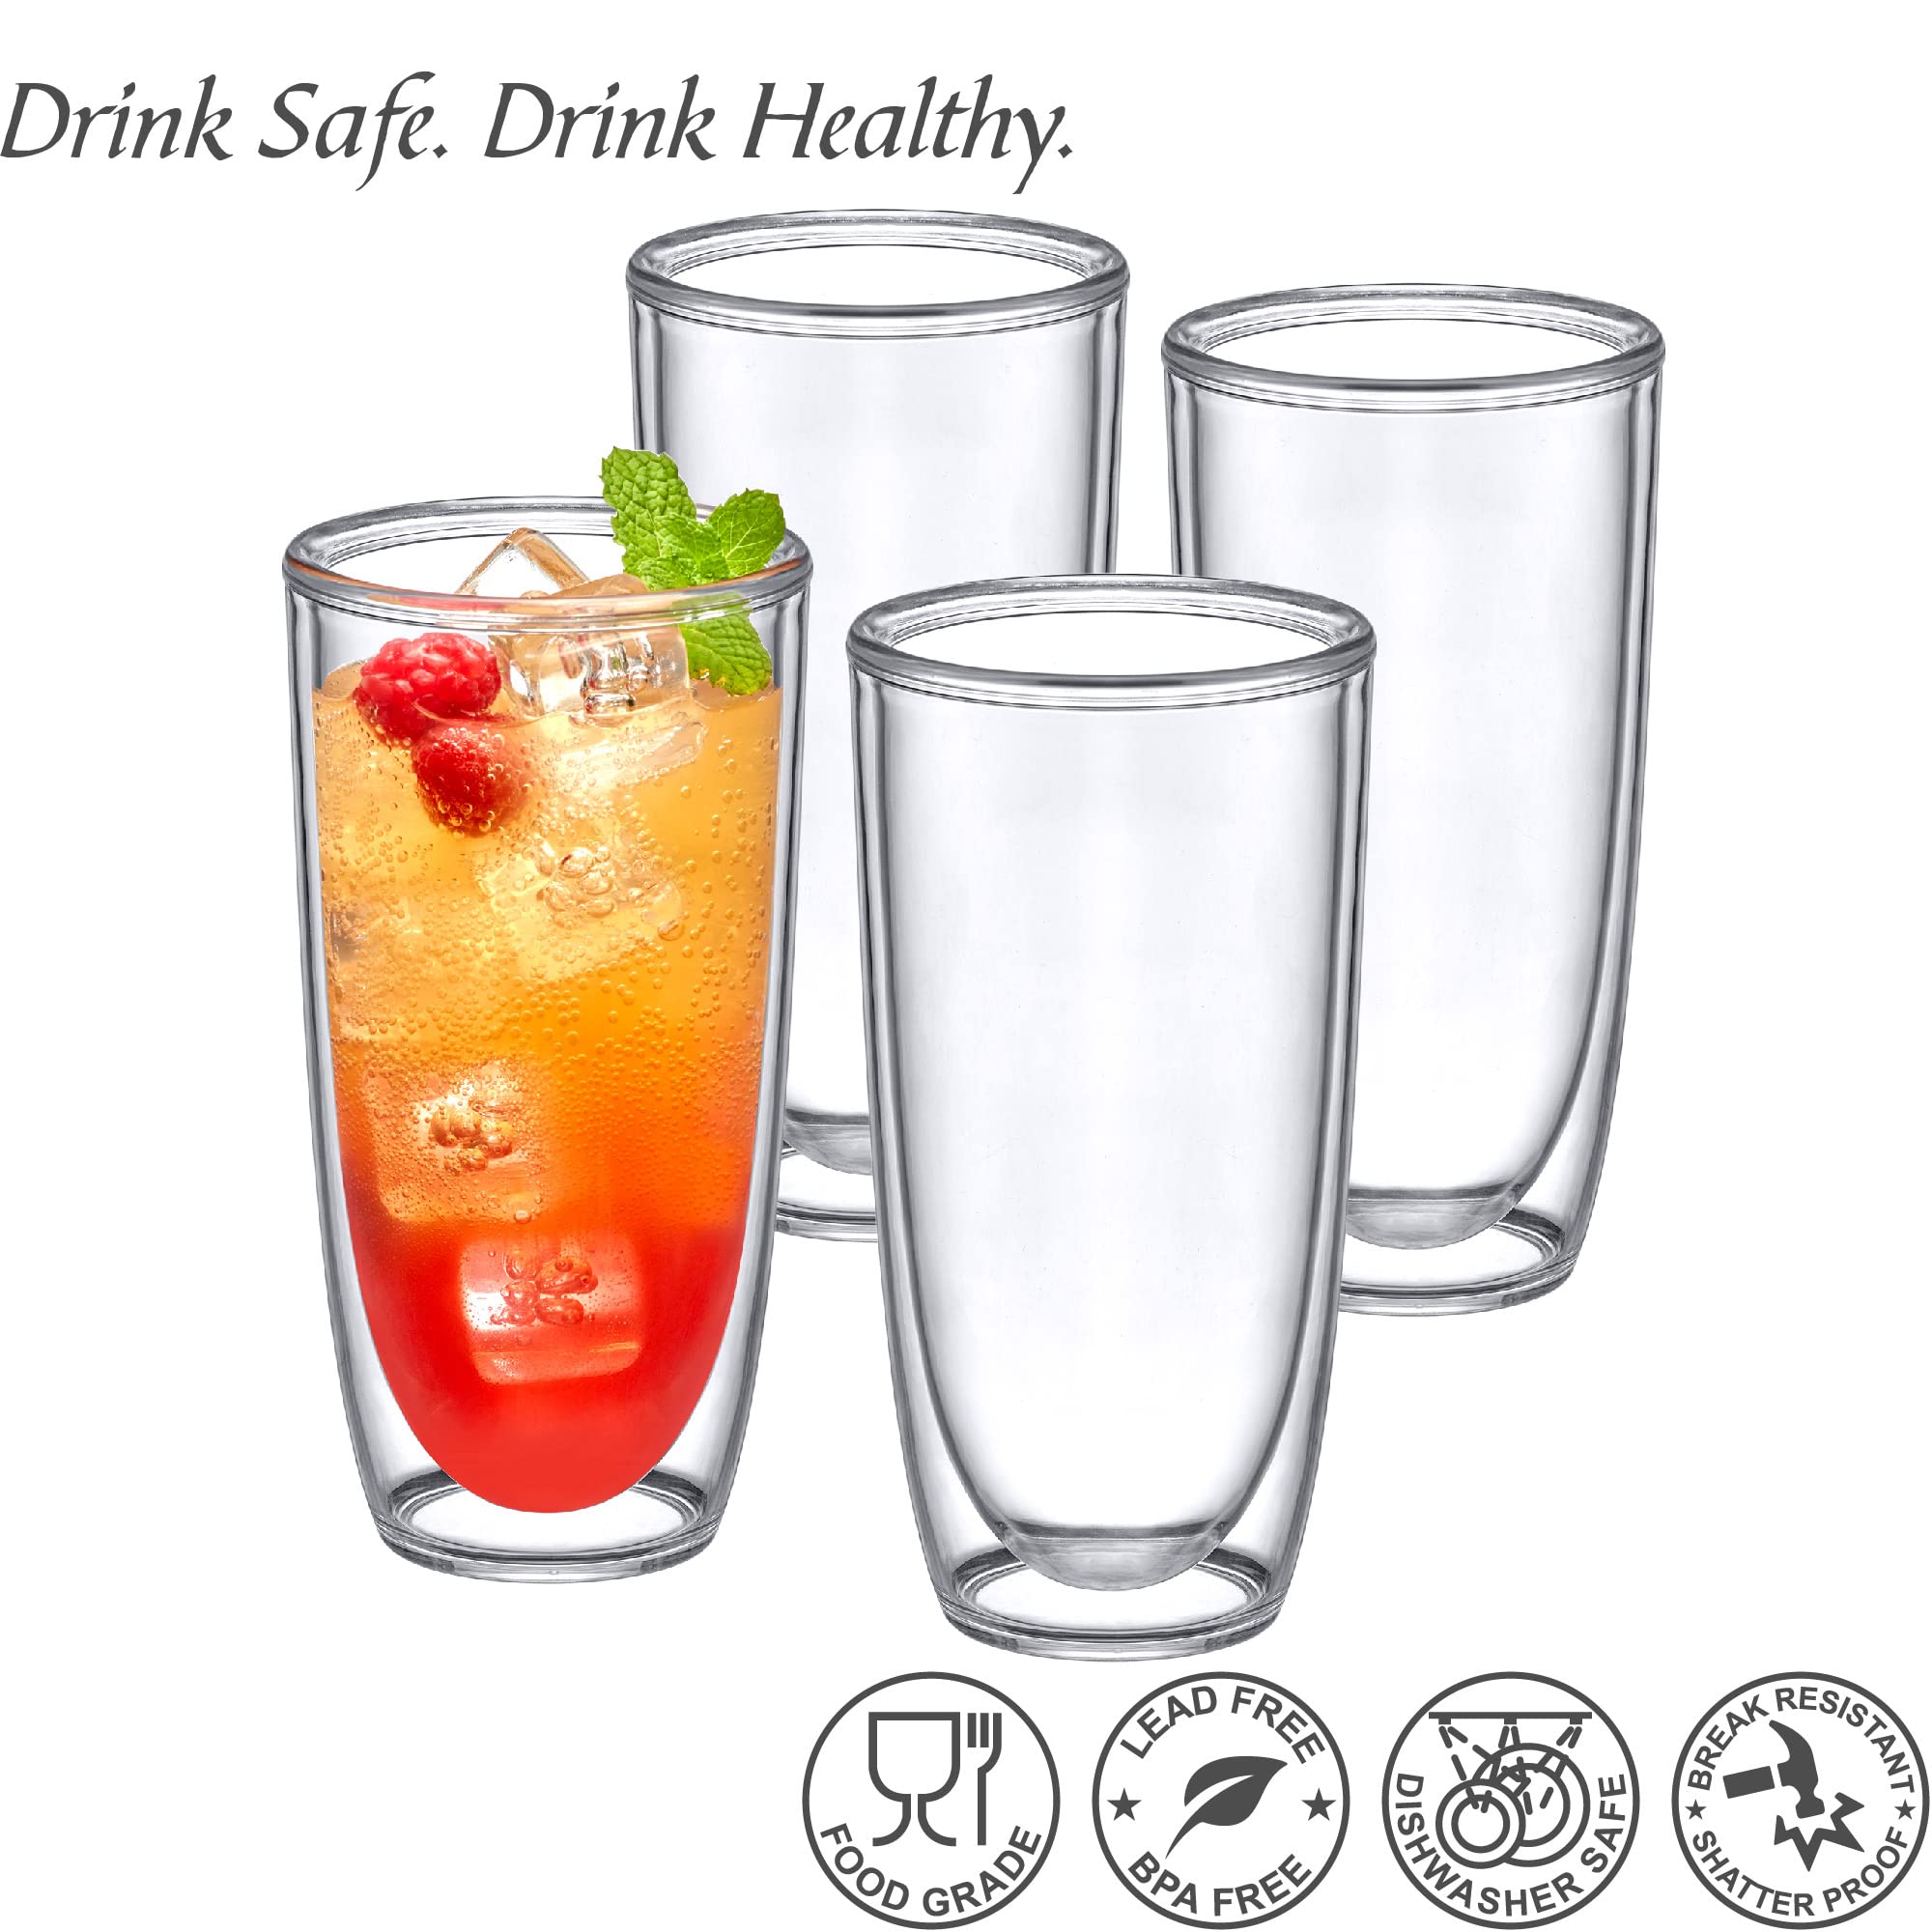 Amazing Abby - Andes - 20-Ounce Insulated Plastic Tumblers (Set of 4), Double-Wall Plastic Drinking Glasses, All-Clear High-Balls, Reusable Plastic Cups, BPA-Free, Shatter-Proof, Dishwasher-Safe